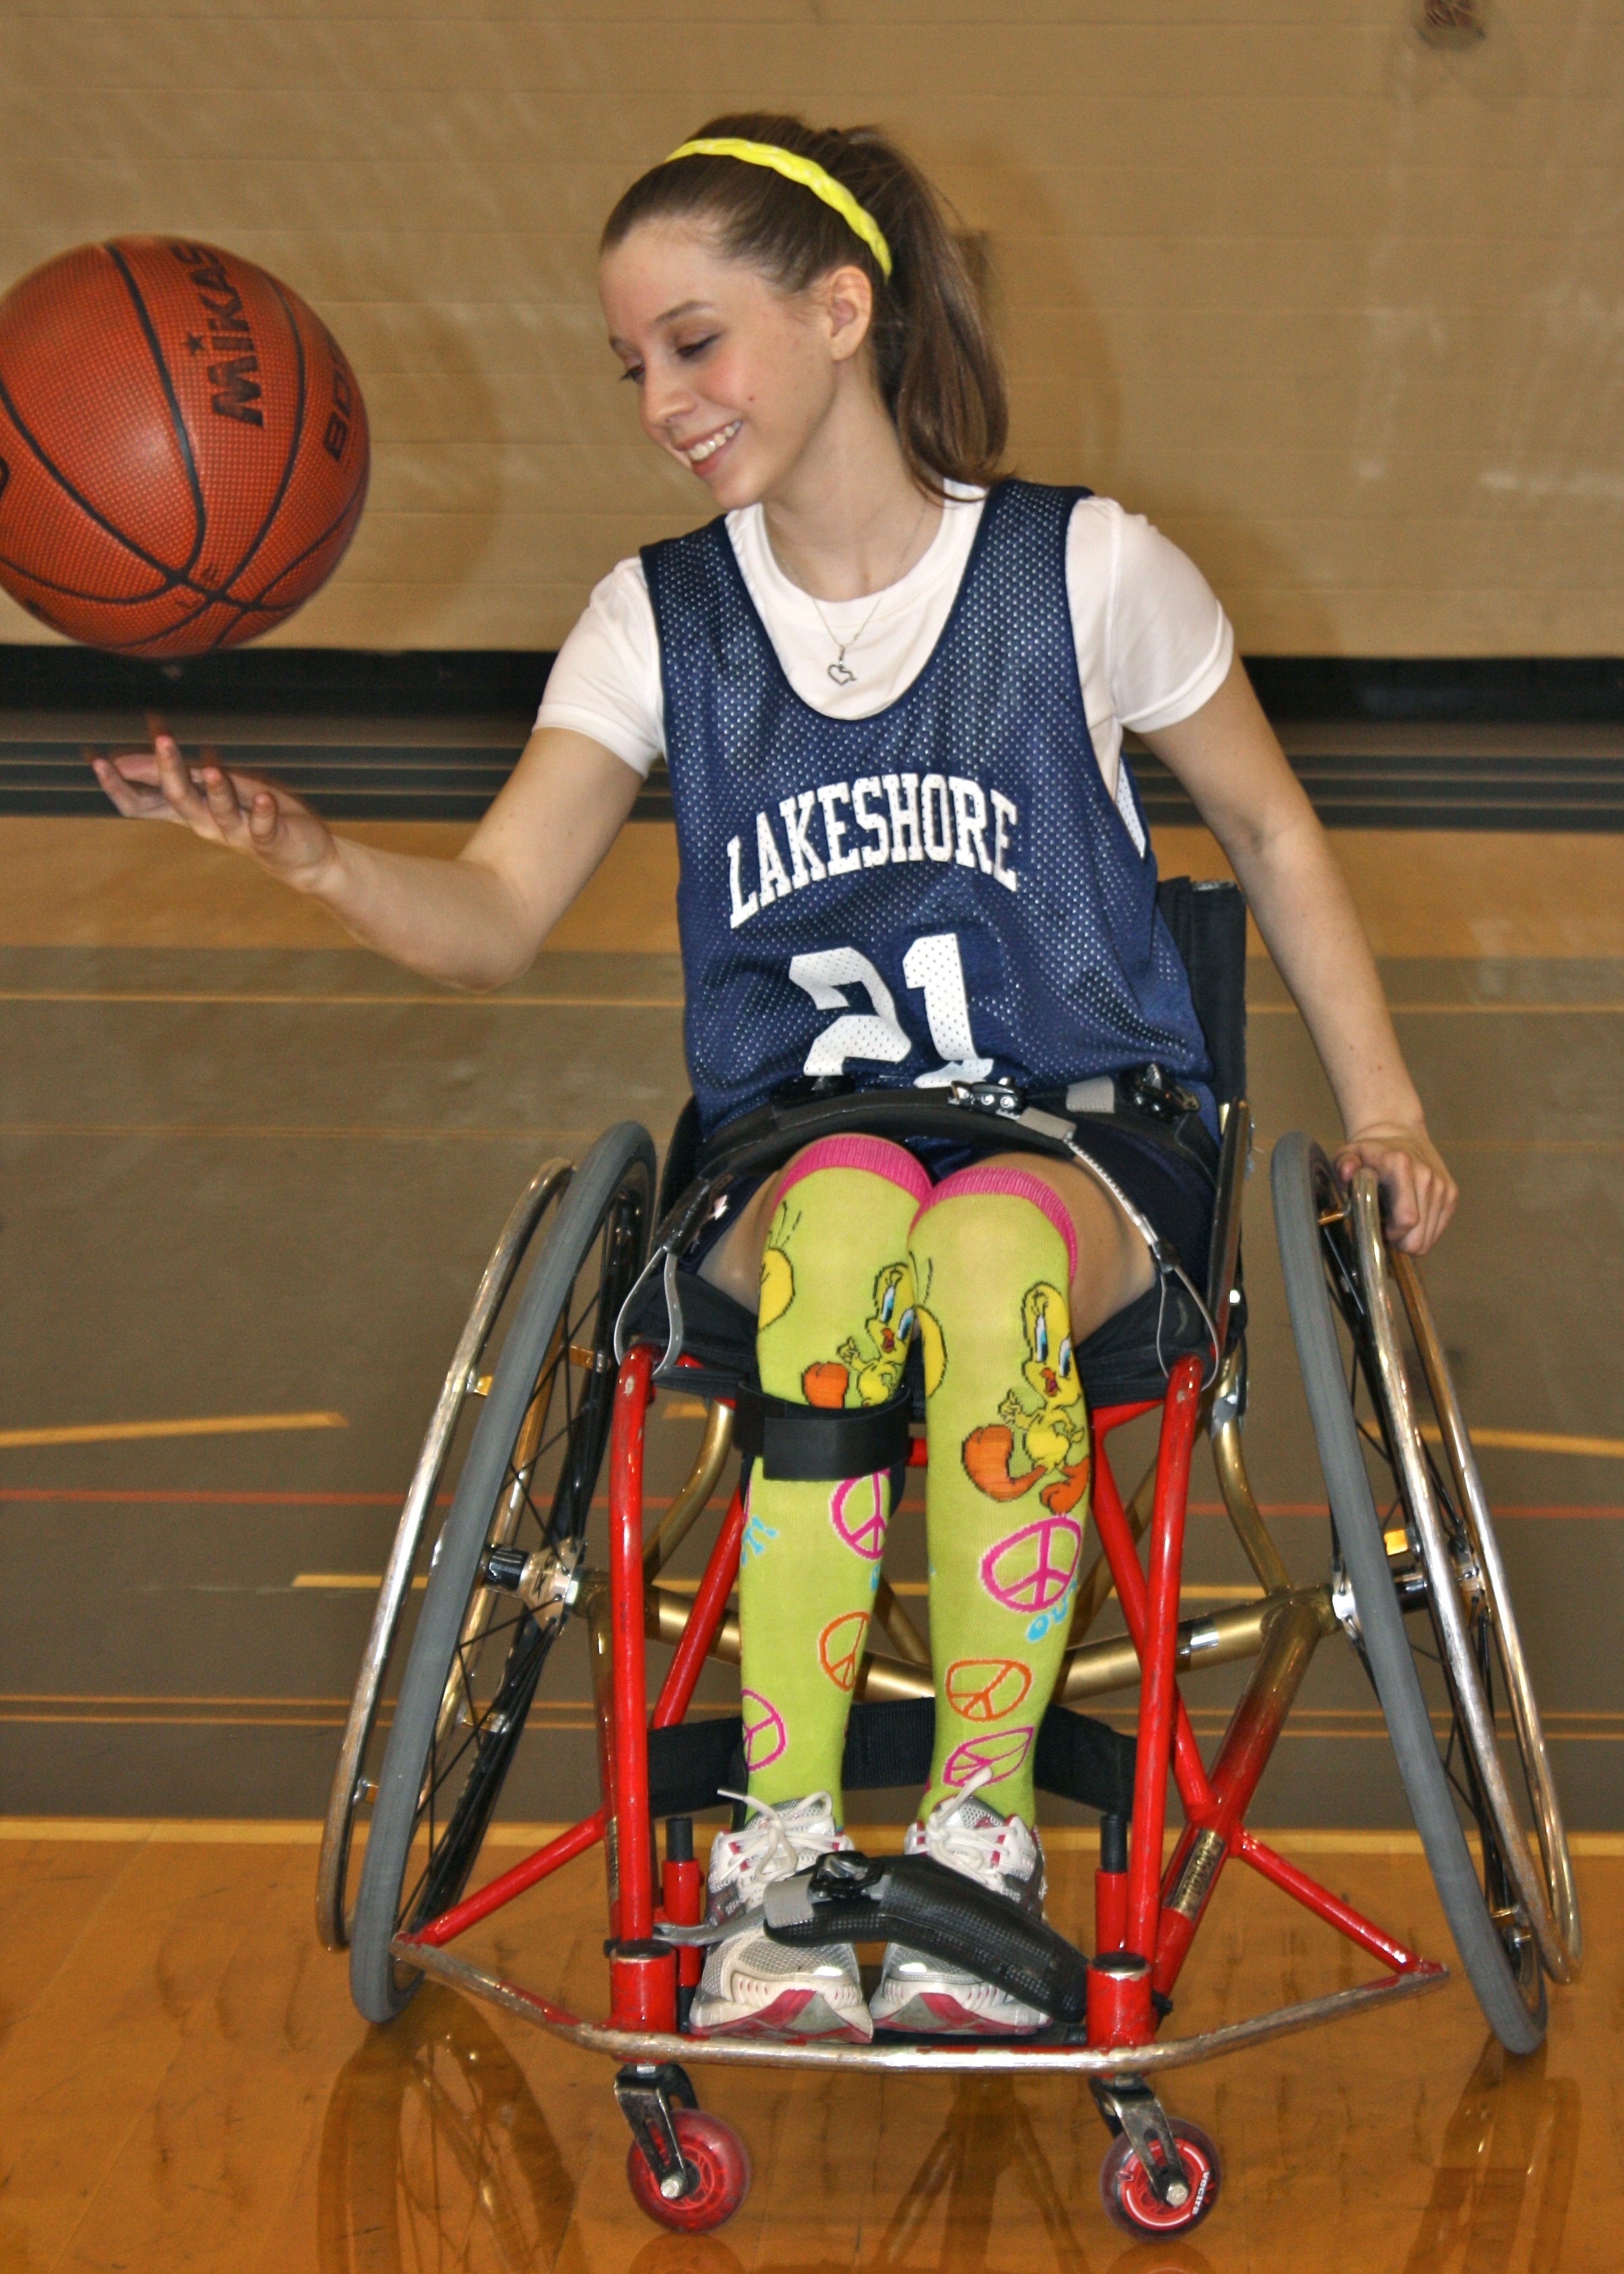 Erica is a young wheelchair basketball player